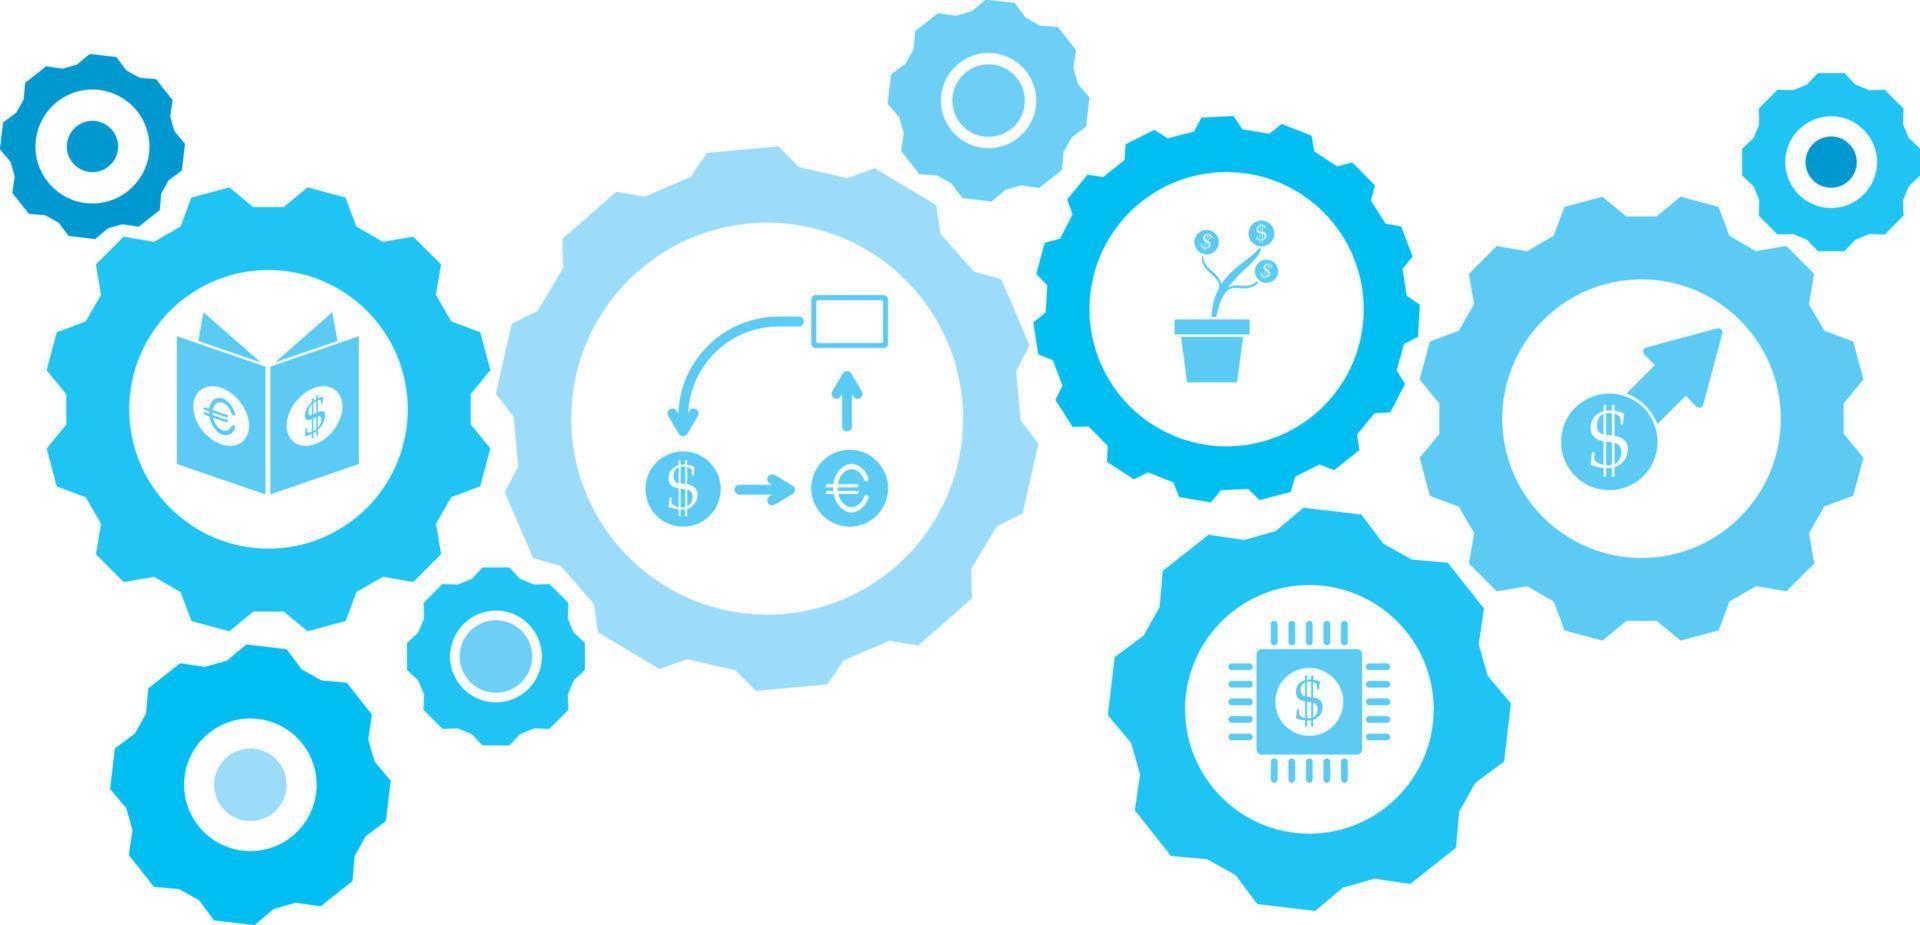 Connected gears and vector icons for logistic, service, shipping, distribution, transport, market, communicate concepts. gear blue icon setbusiness, finance .